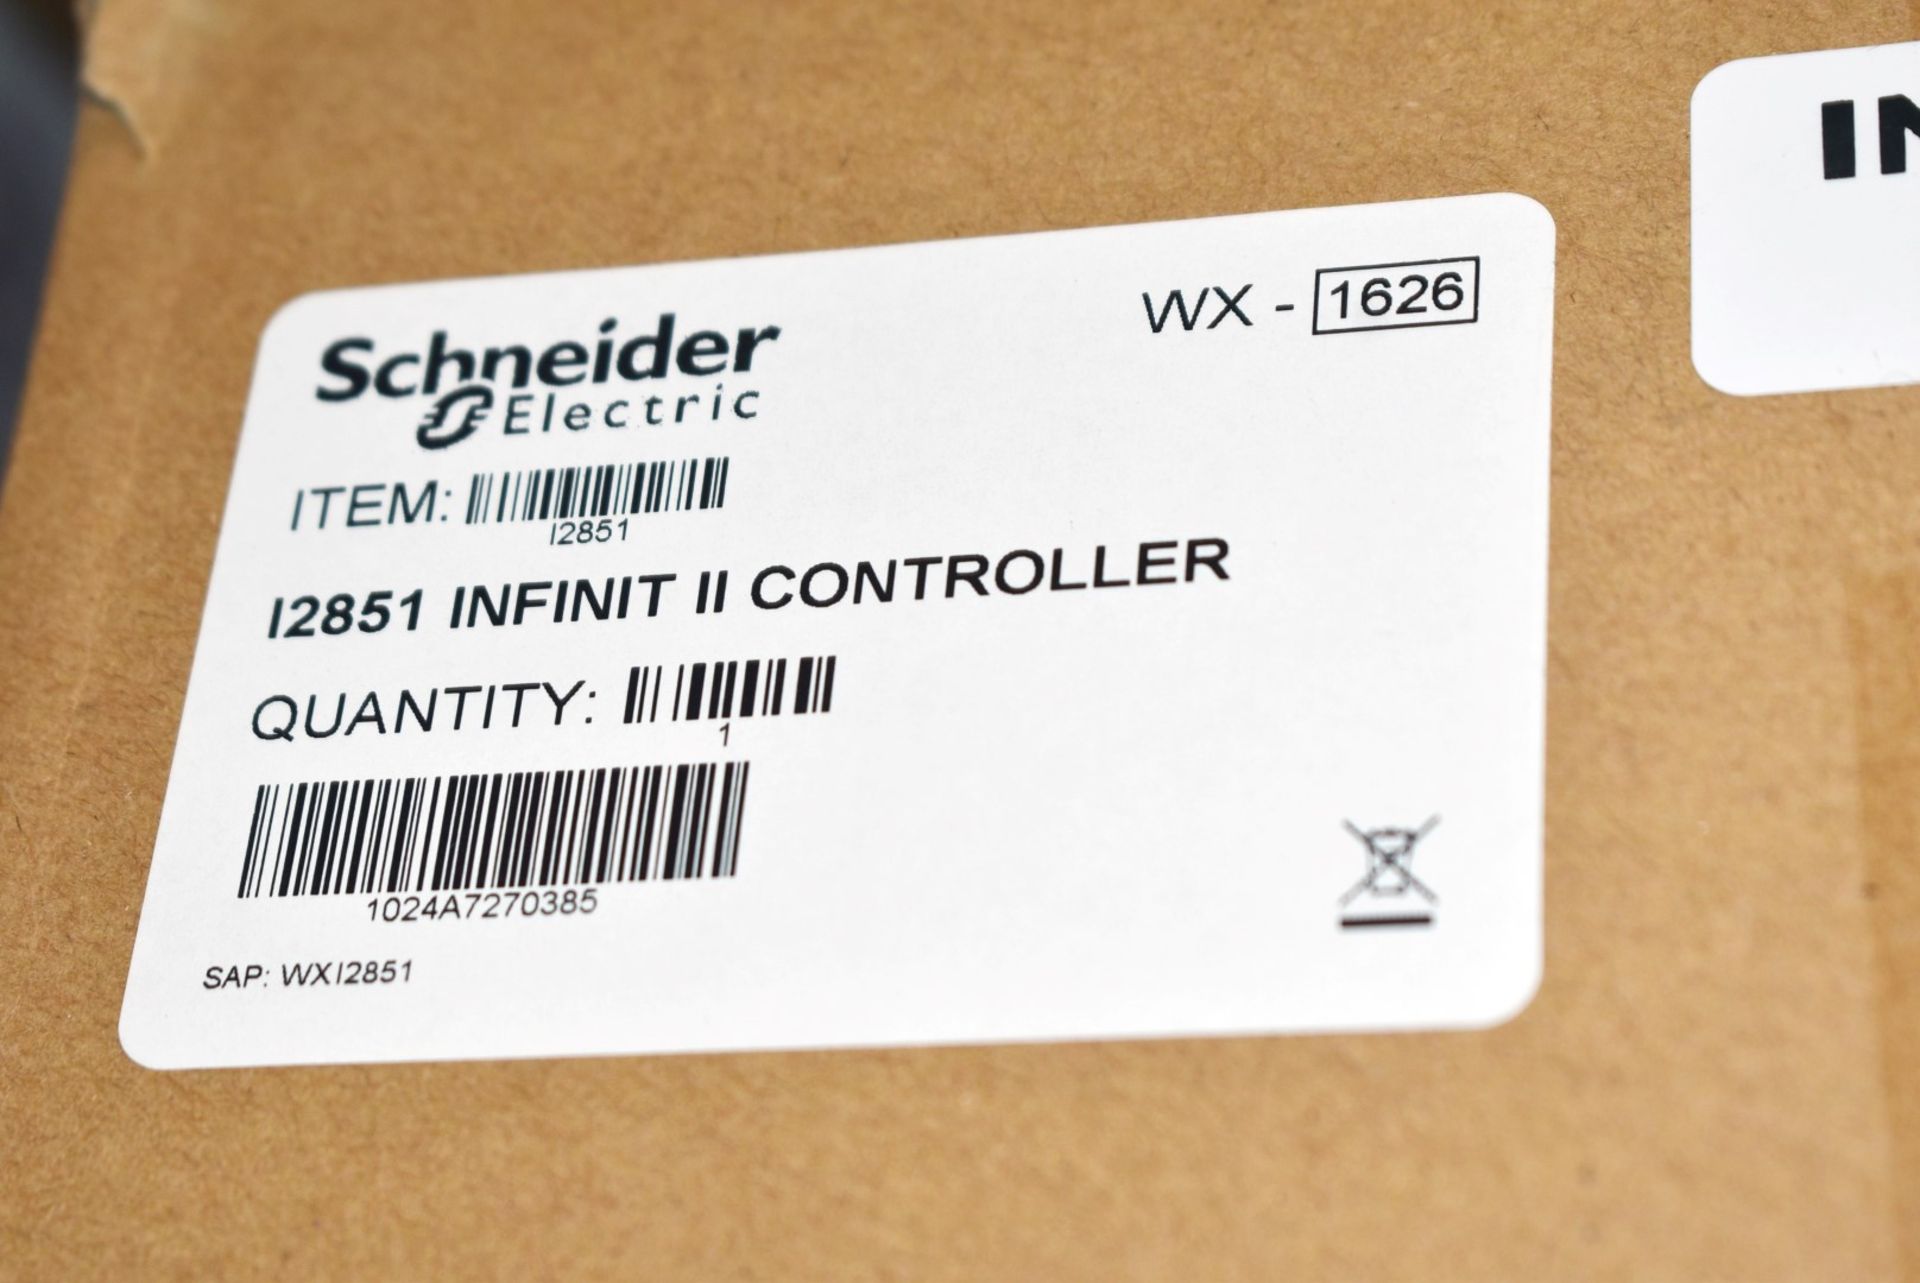 1 x Schneider Electric Andover Continuum i2851 Infinit II Controller - Unused Boxed Stock - Image 4 of 5